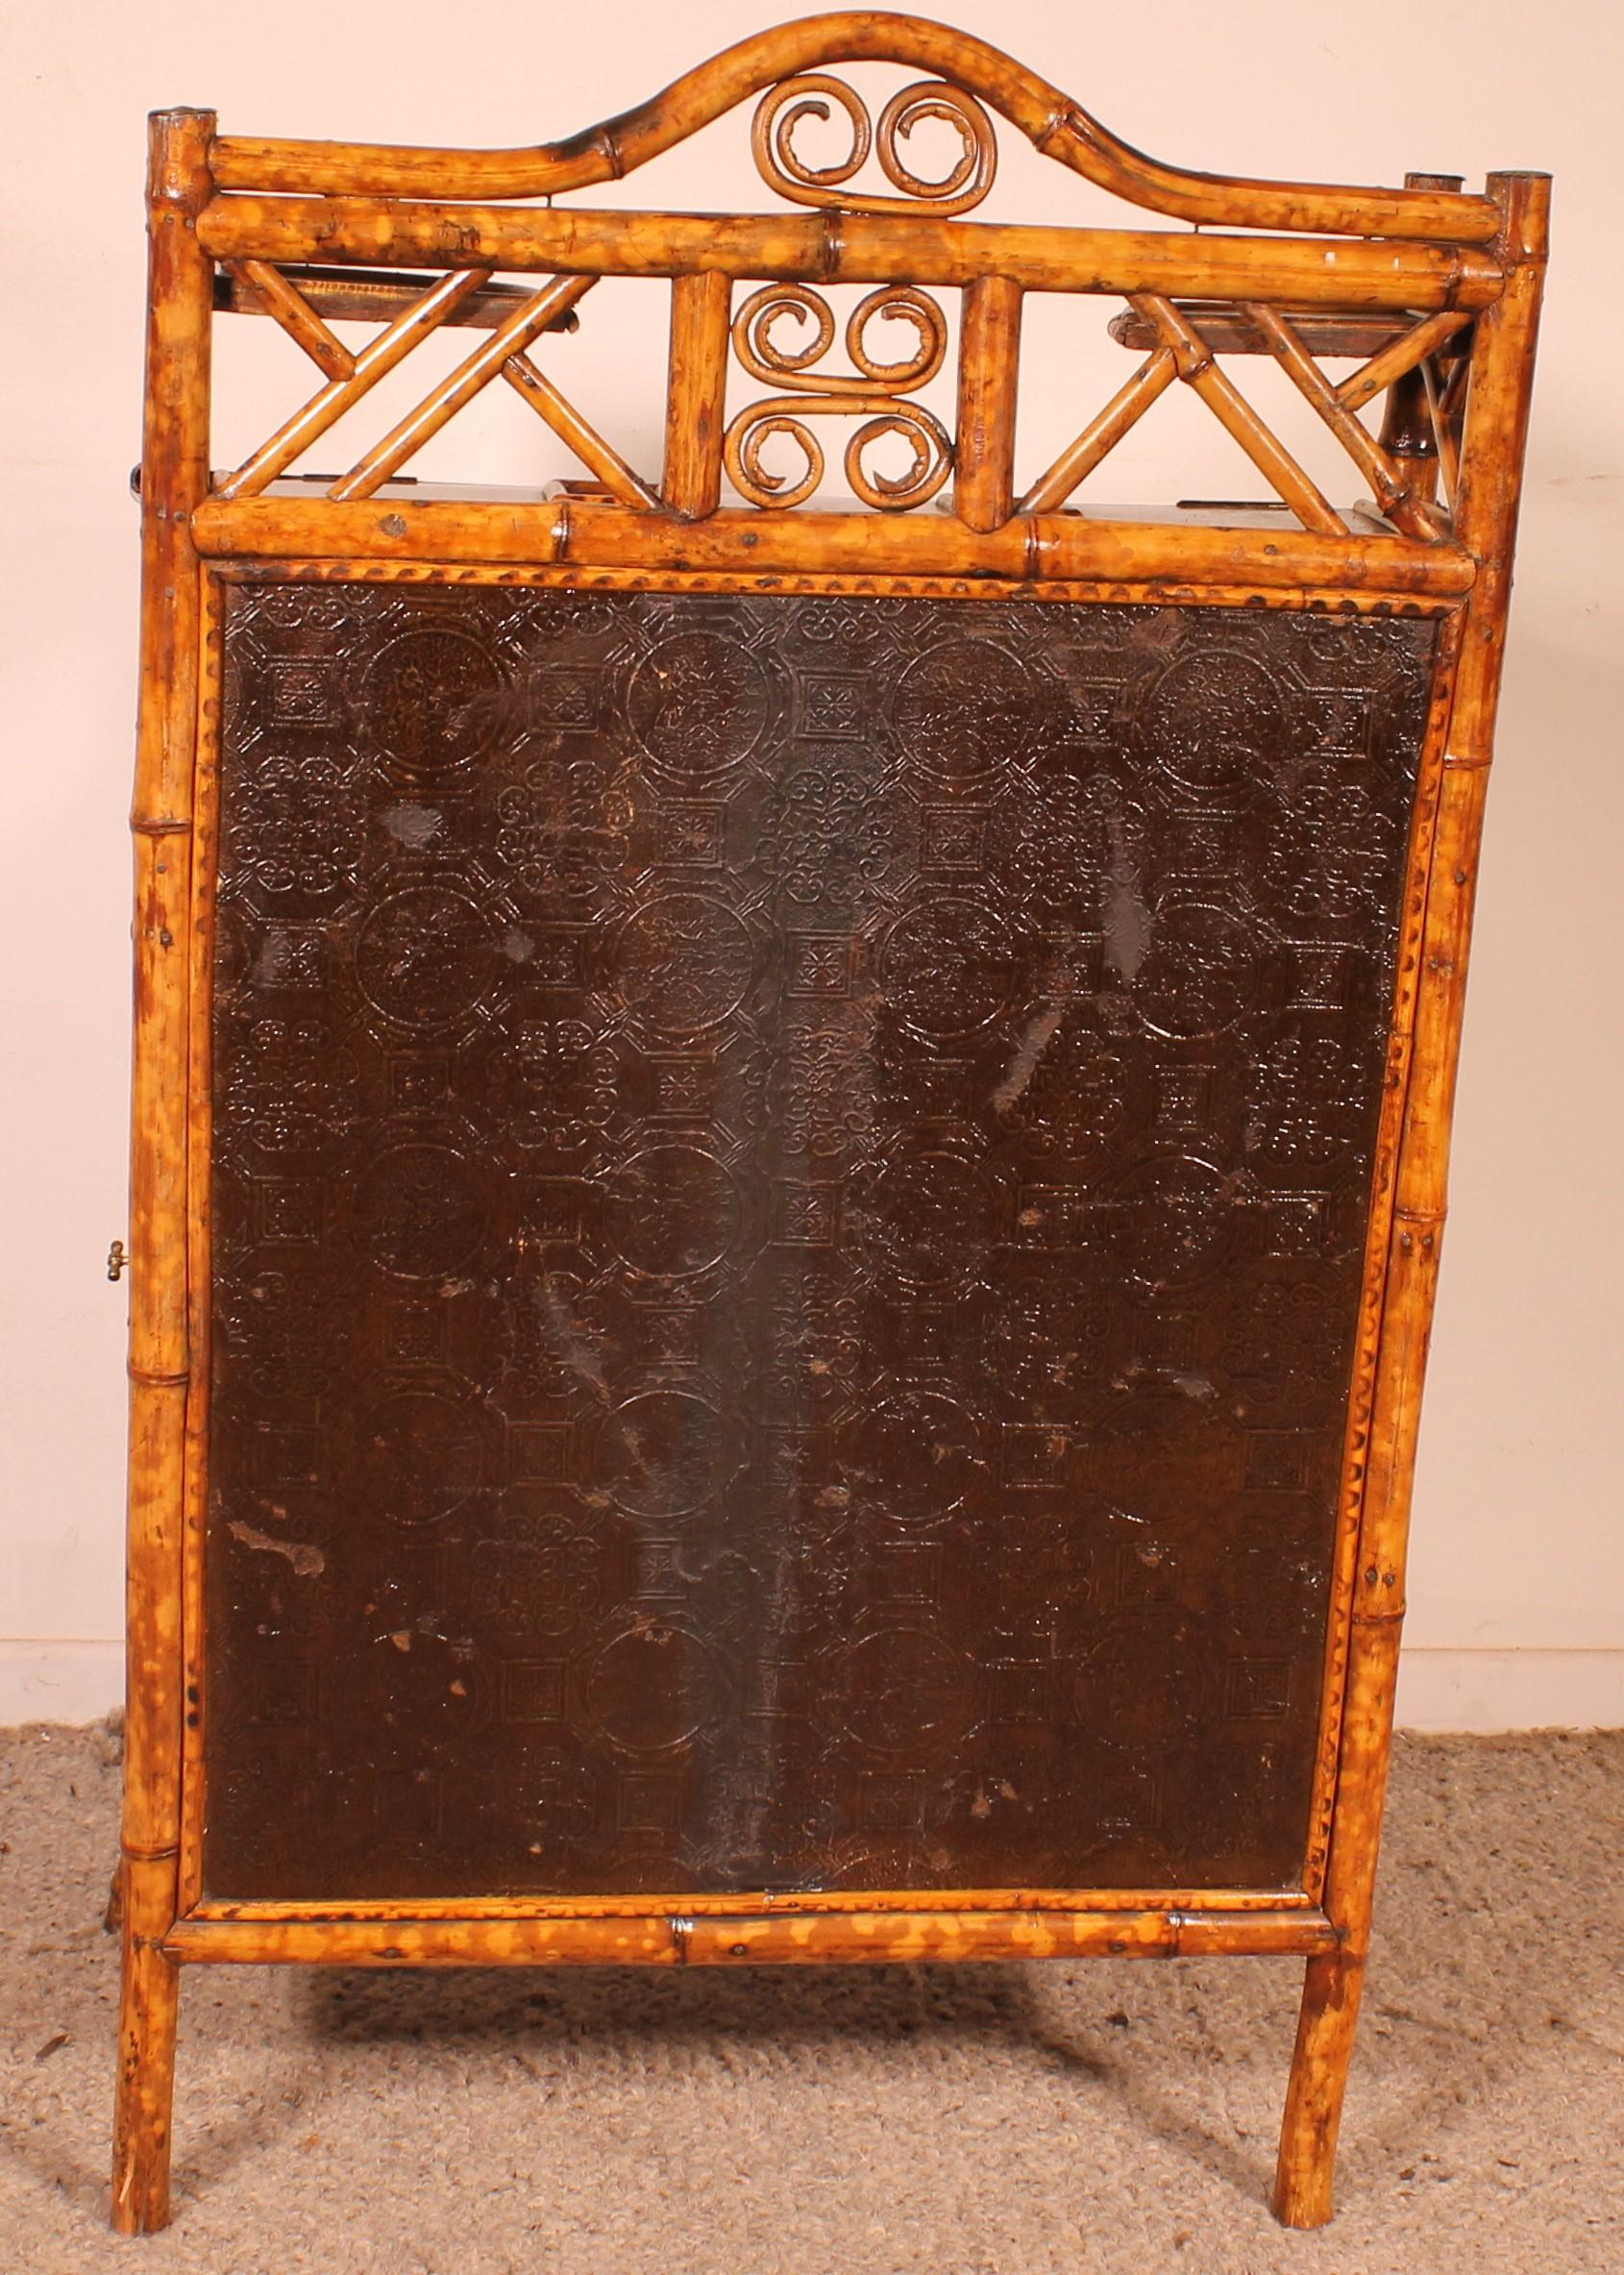 Secretary/davenport In Bamboo And Lacquer With Asian Decor - 19th Century For Sale 5